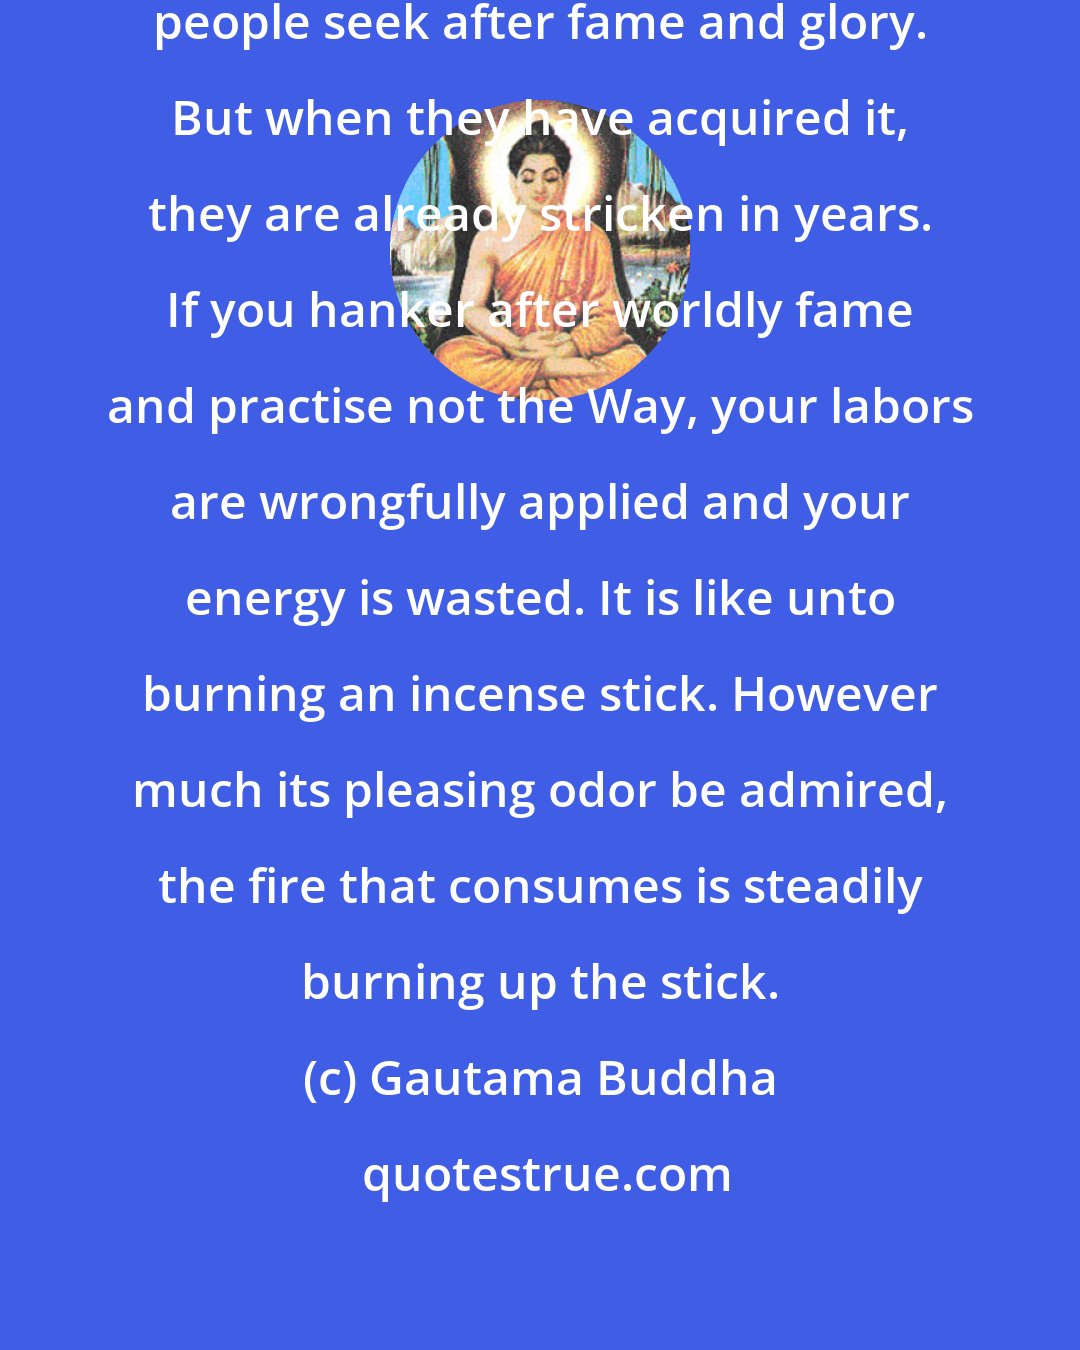 Gautama Buddha: Moved by their selfish desires, people seek after fame and glory. But when they have acquired it, they are already stricken in years. If you hanker after worldly fame and practise not the Way, your labors are wrongfully applied and your energy is wasted. It is like unto burning an incense stick. However much its pleasing odor be admired, the fire that consumes is steadily burning up the stick.